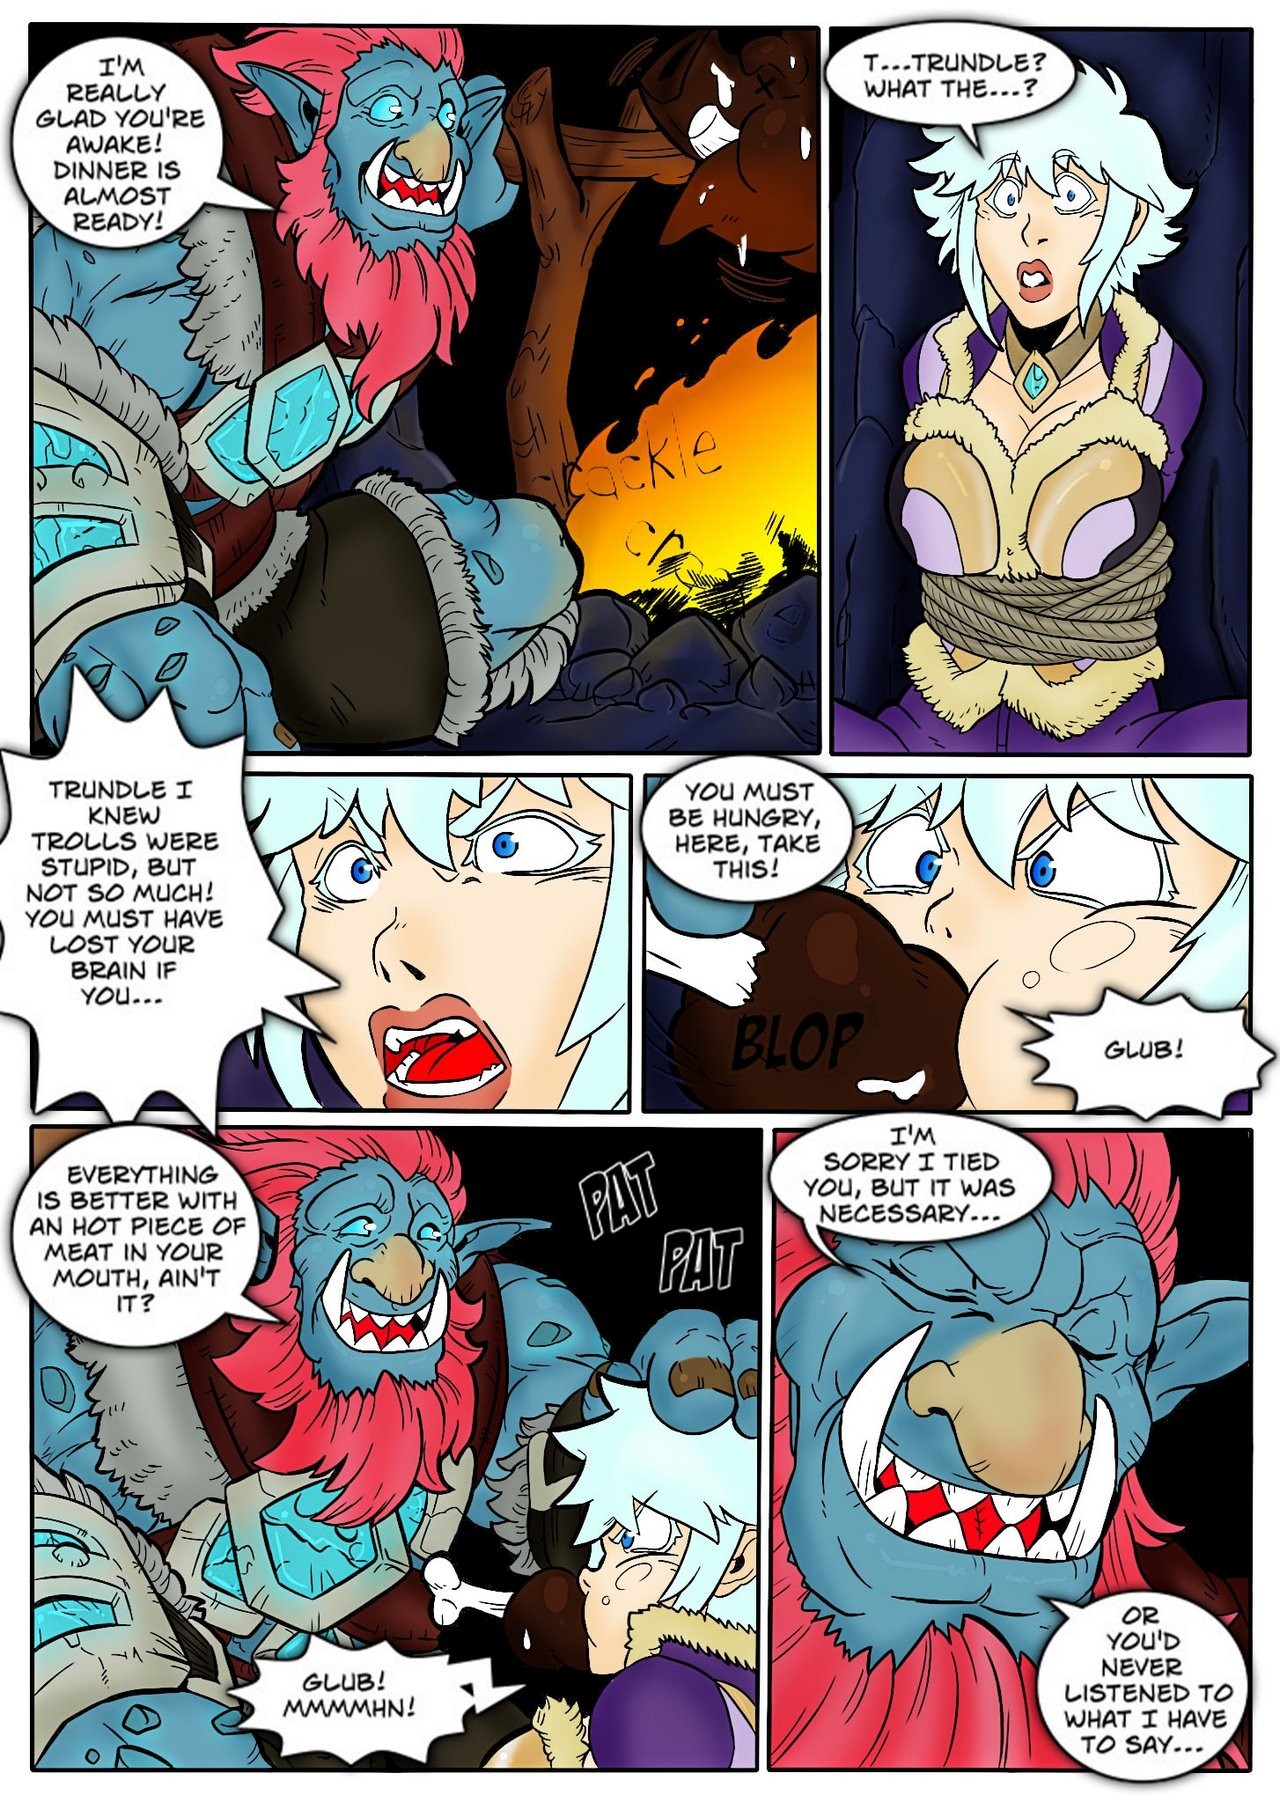 Tales of the Troll King ch. 1 - 3 ] [Colorized] porn comic picture 22